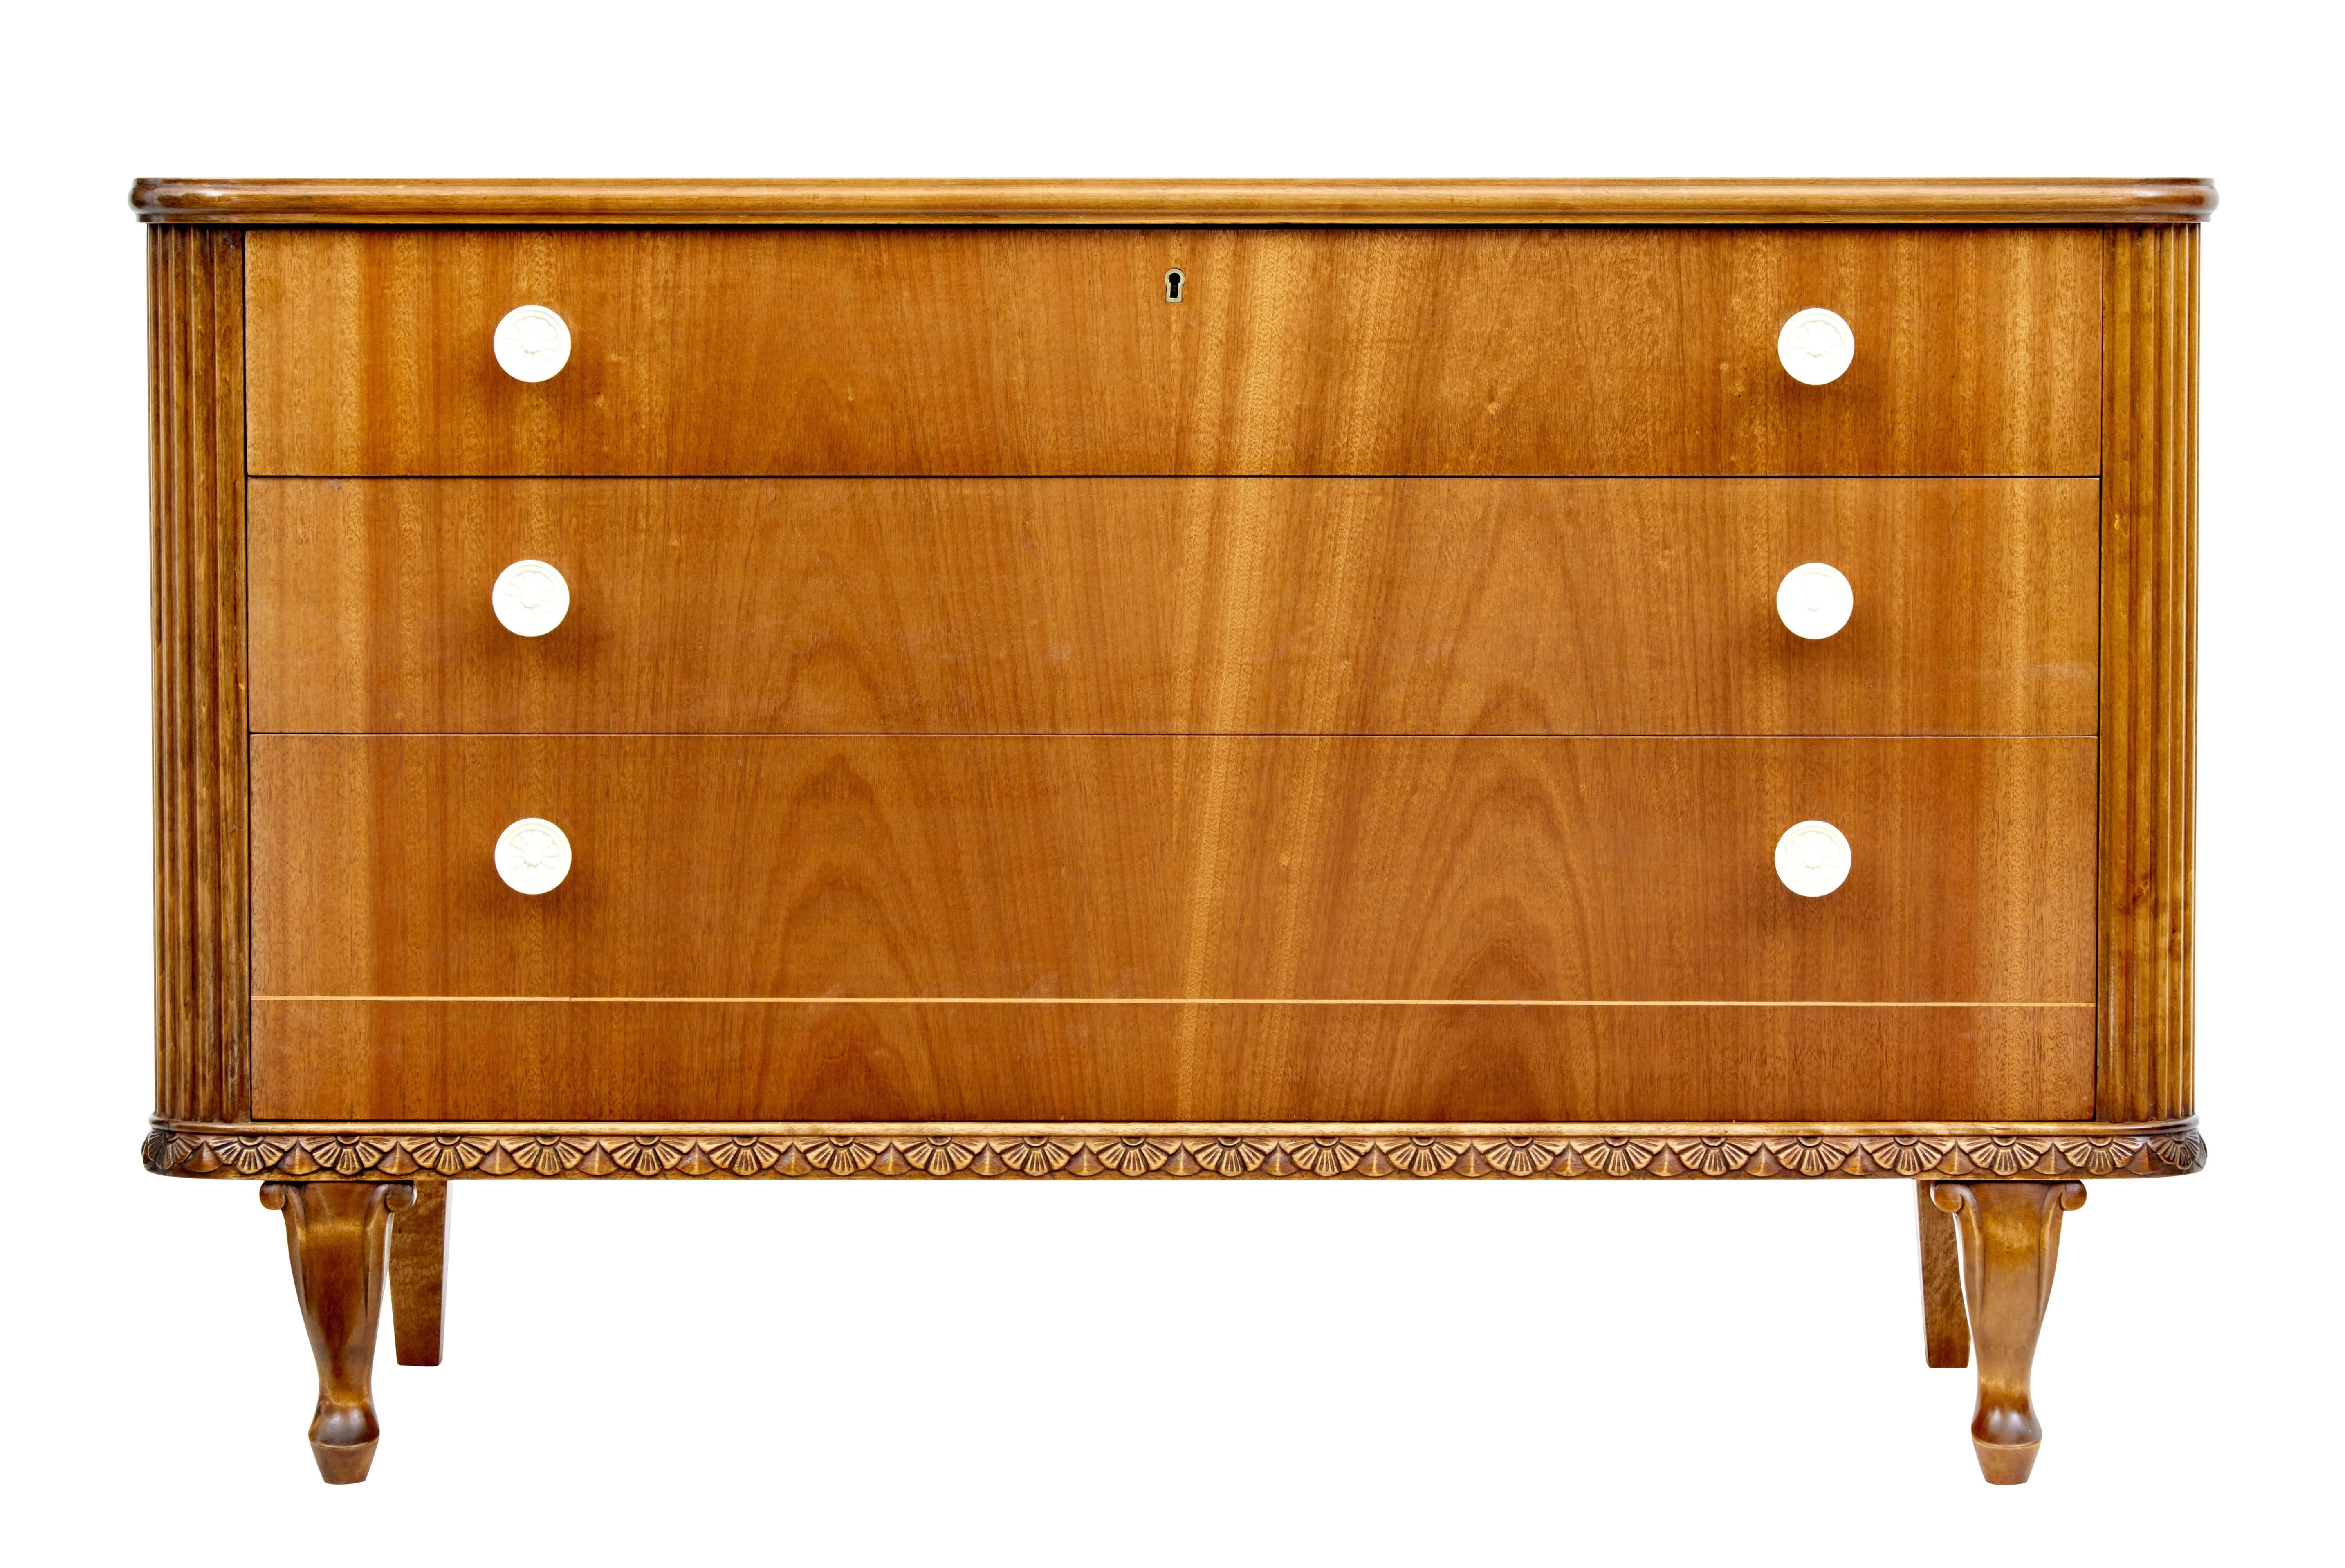 Elegant 1950s Scandinavian modern teak chest of drawers.

Graduating three drawers which are flanked either side by fluted sides. Bottom door with contrasting stringing detail. Carved apron below the drawers. Standing on scrolling front legs and